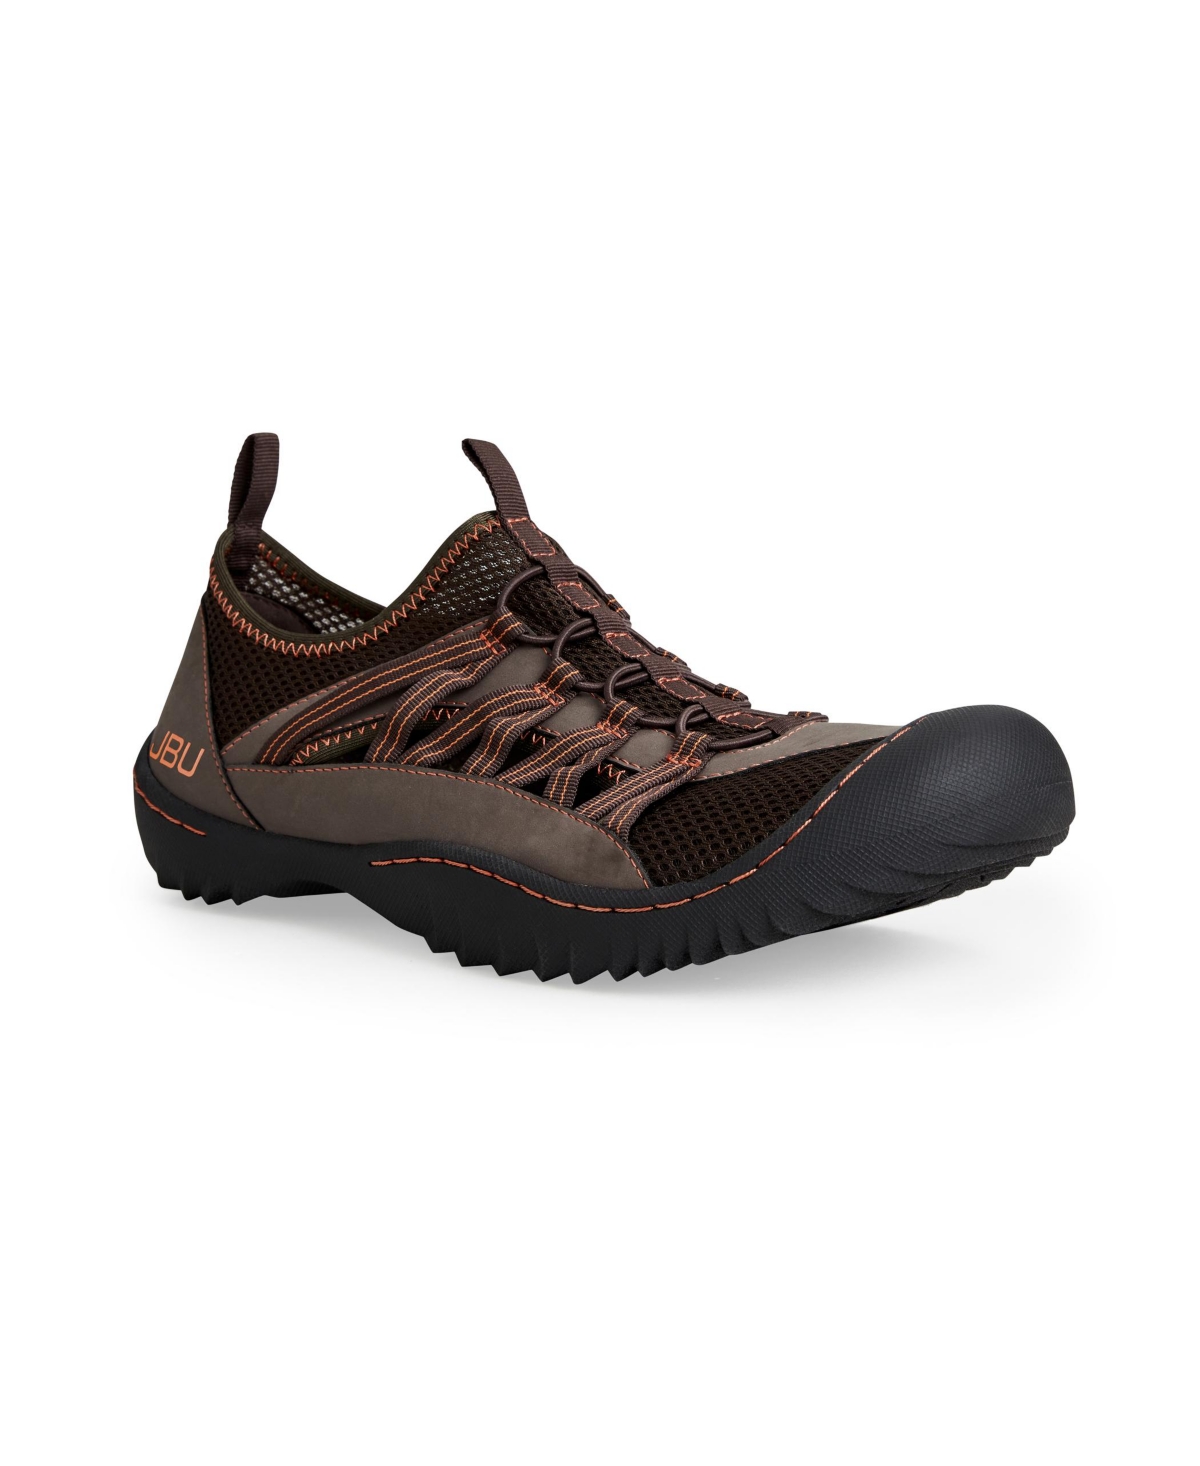 Men's Topsail Water Shoes - Brown